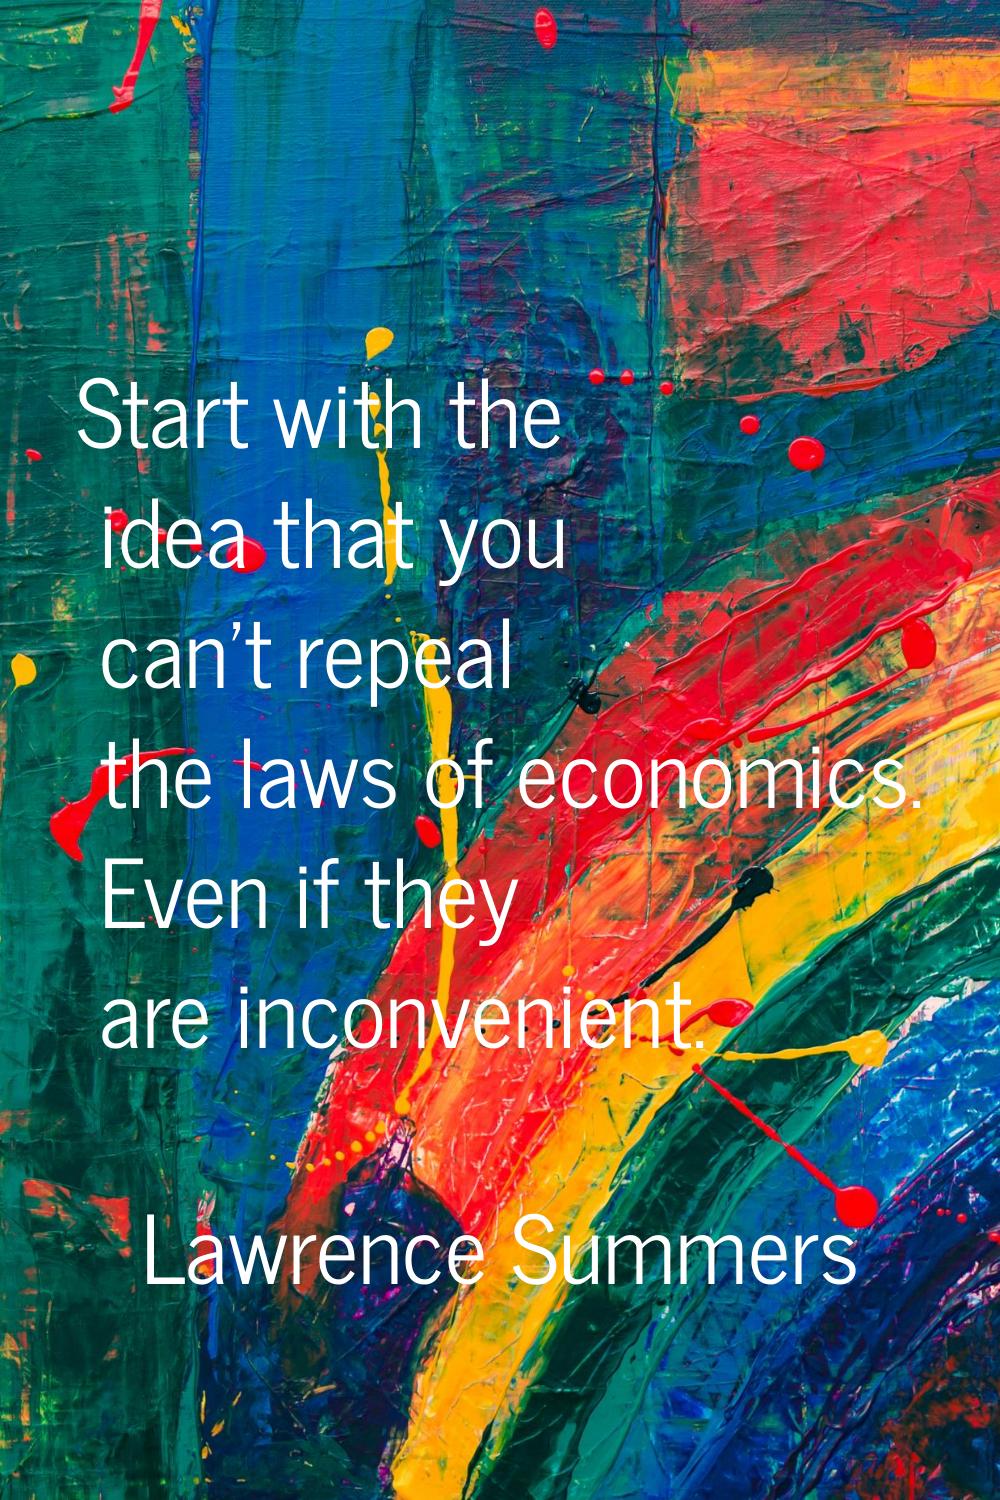 Start with the idea that you can't repeal the laws of economics. Even if they are inconvenient.